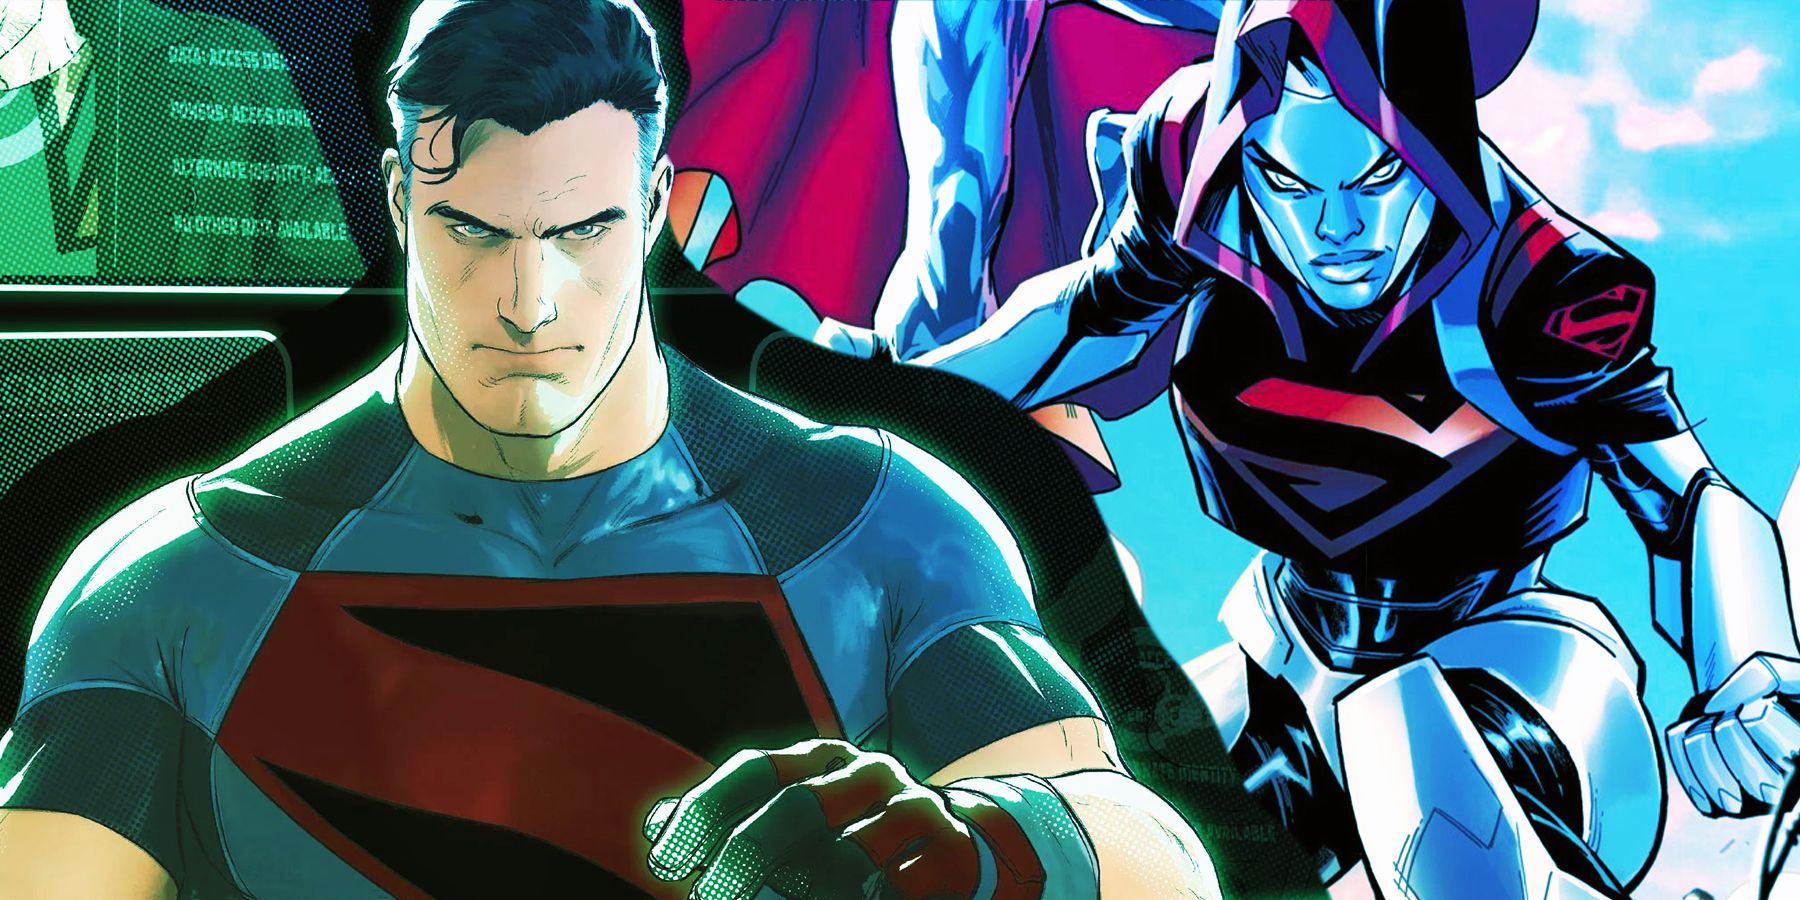 Grant Morrison returns to Superman and the Authority in a new team